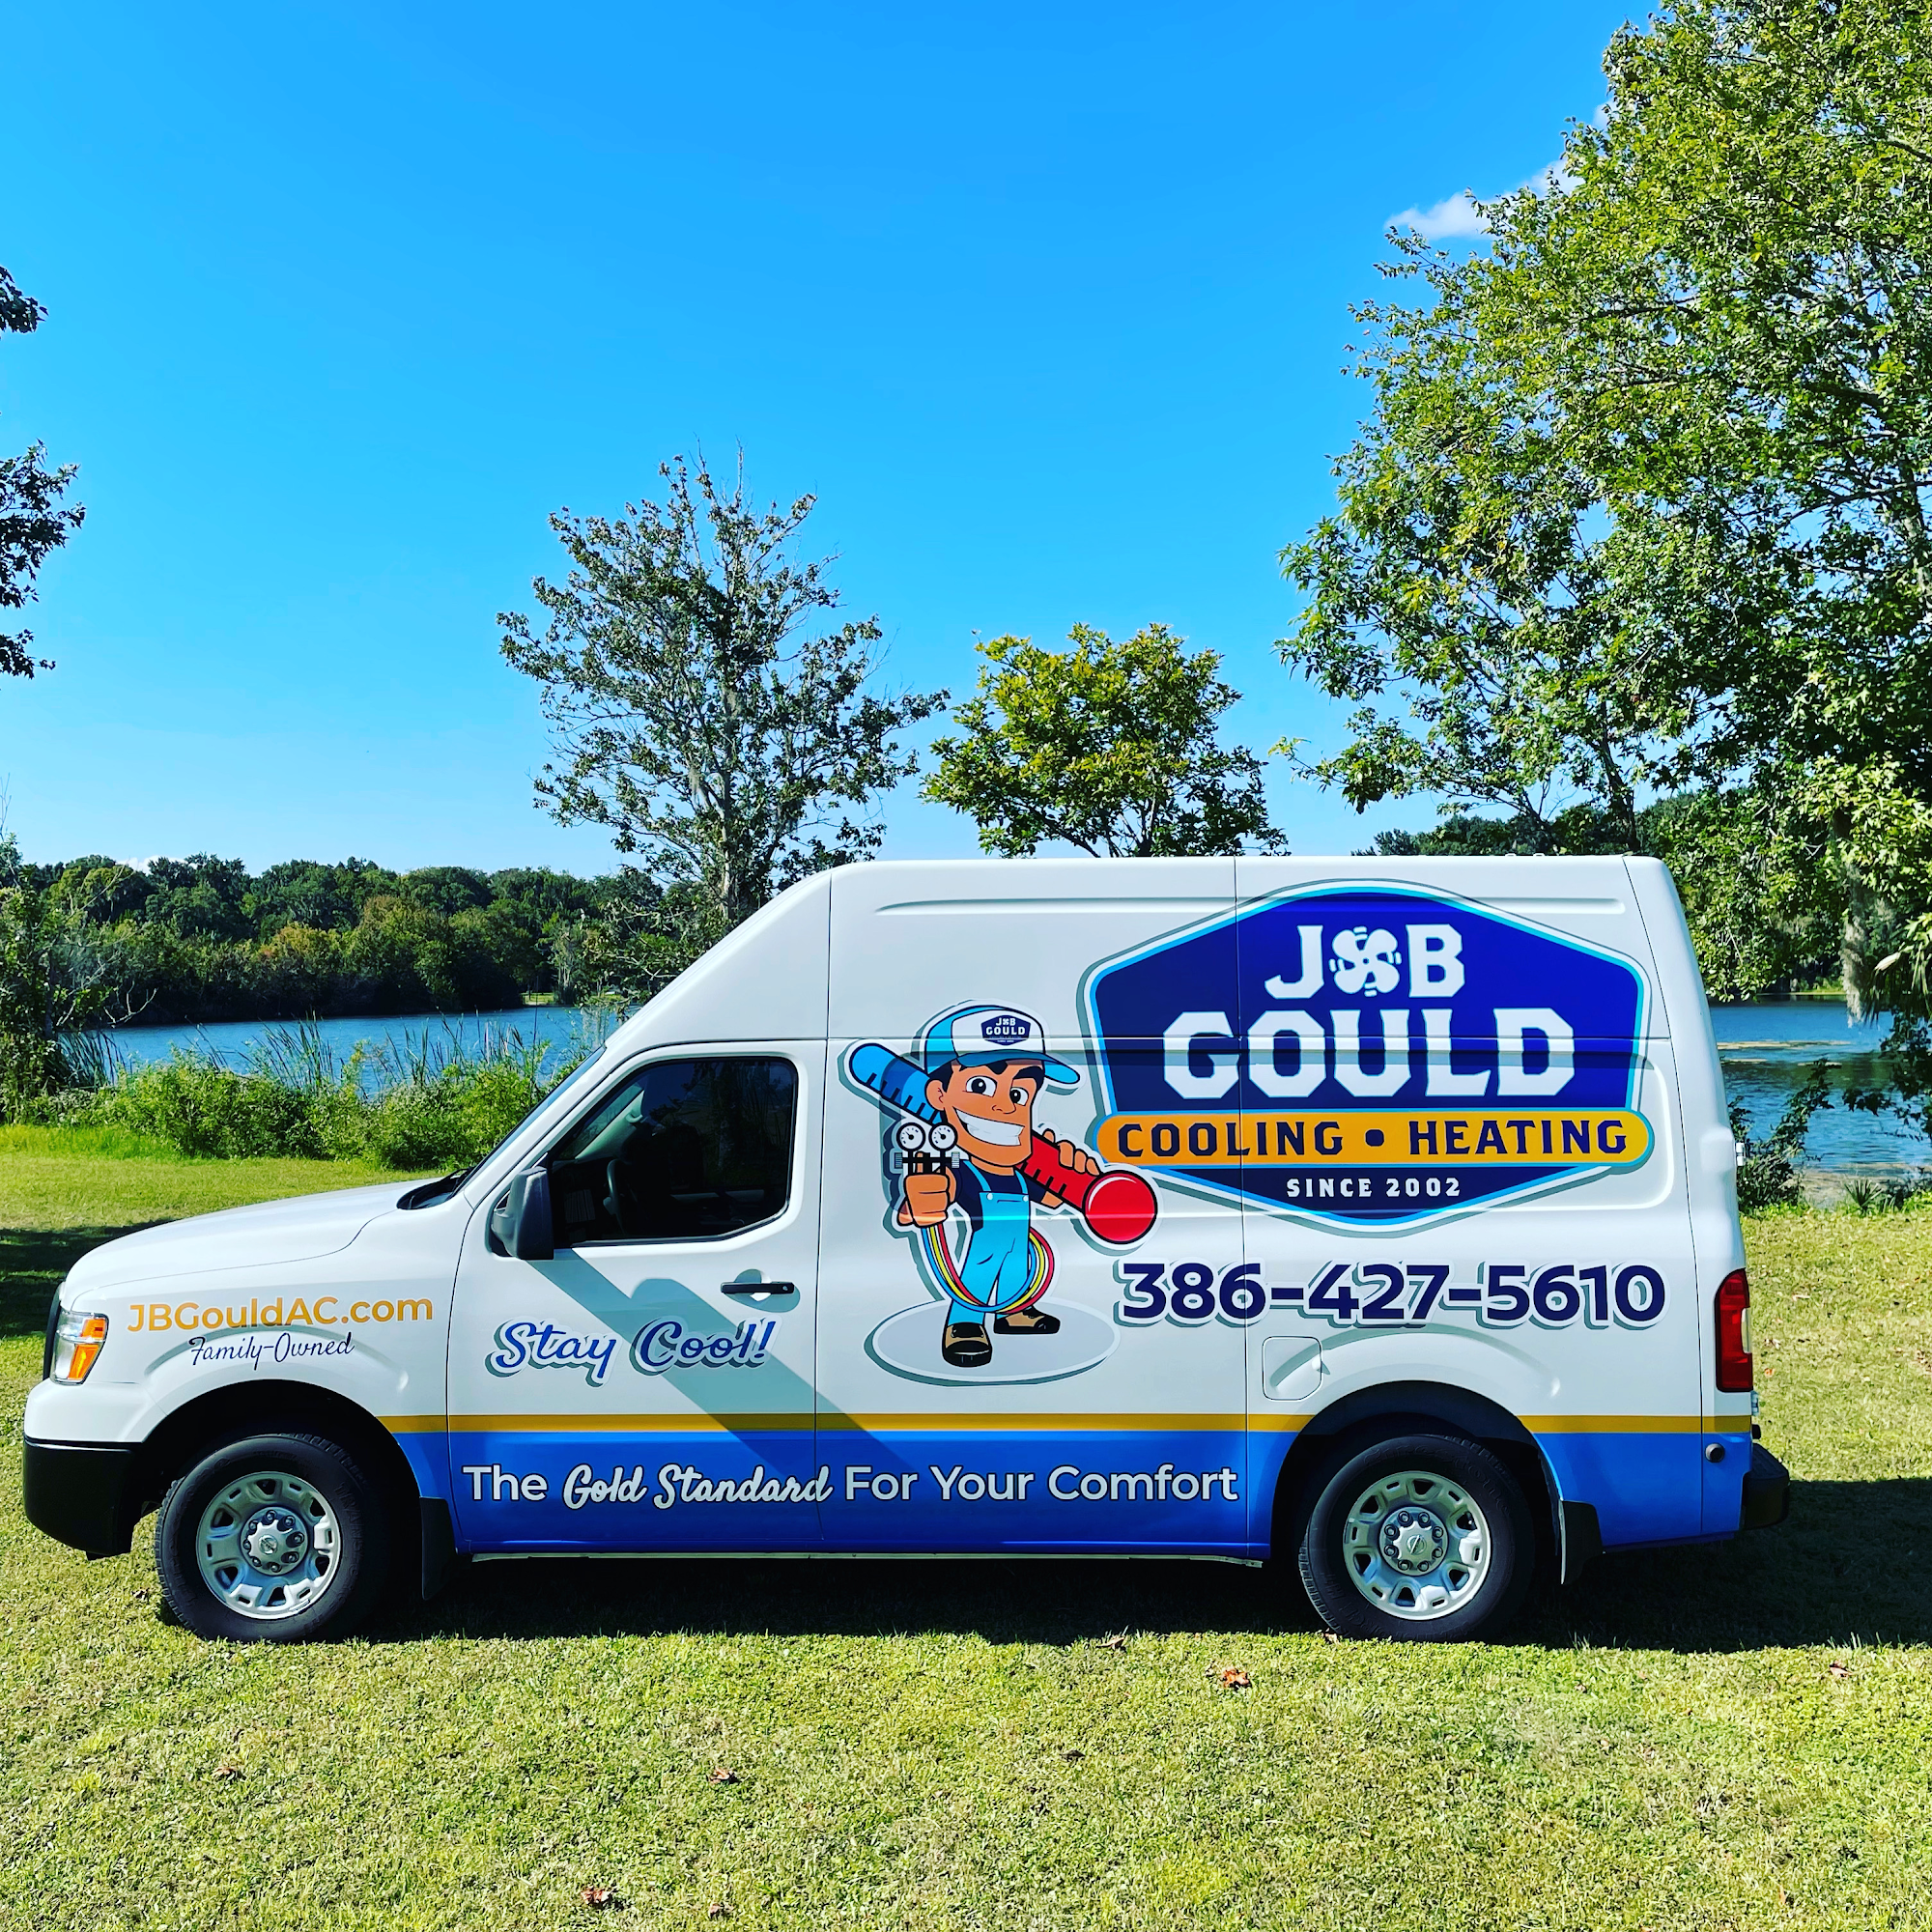 J&B Gould Air Conditioning & Heating